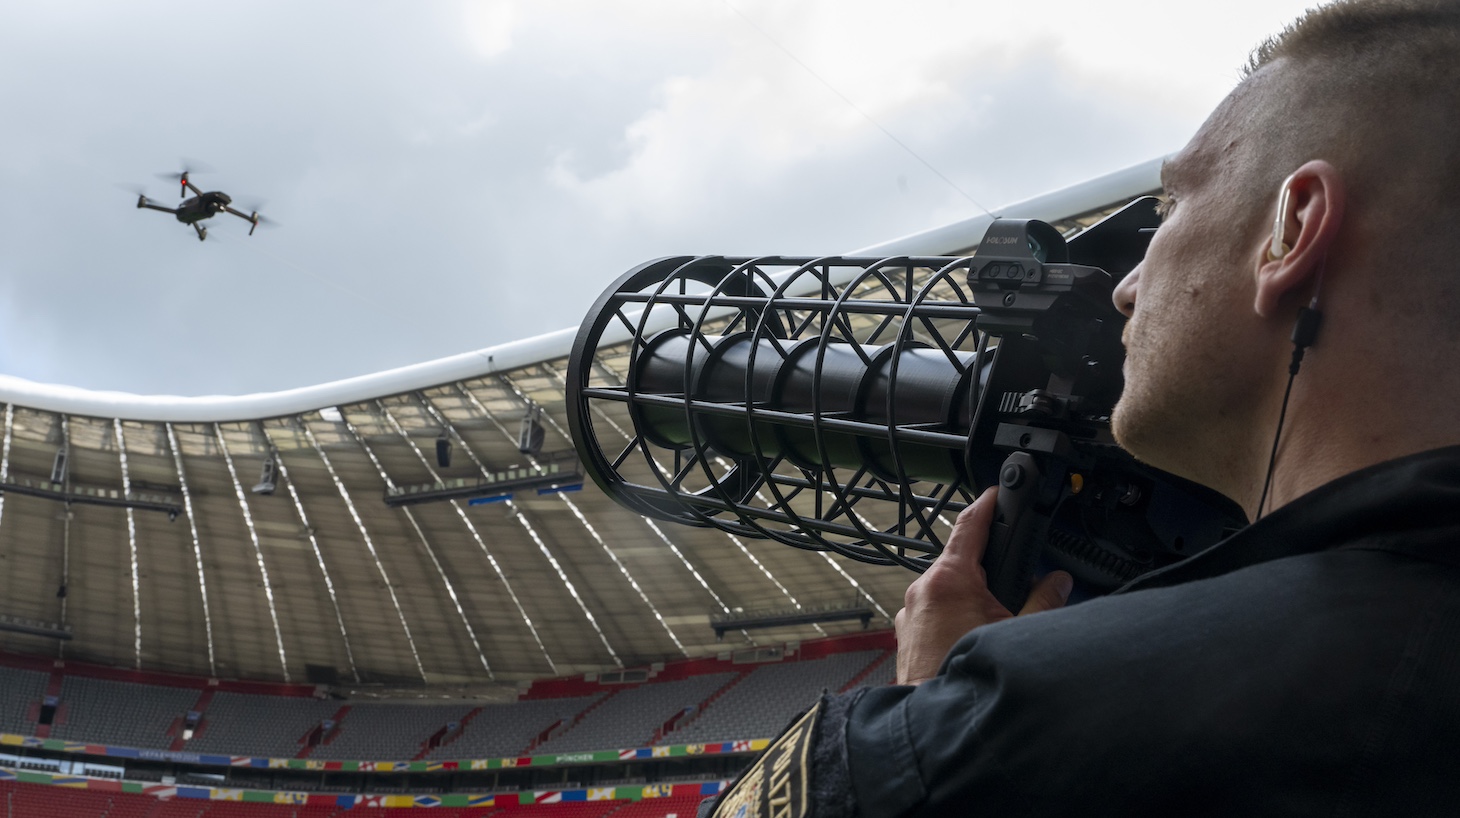 A specially trained police officer demonstrates a controlled landing of a drone using a drone jammer during the presentation of the Munich security concept for the 2024 European Football Championship at the Munich soccer stadium.